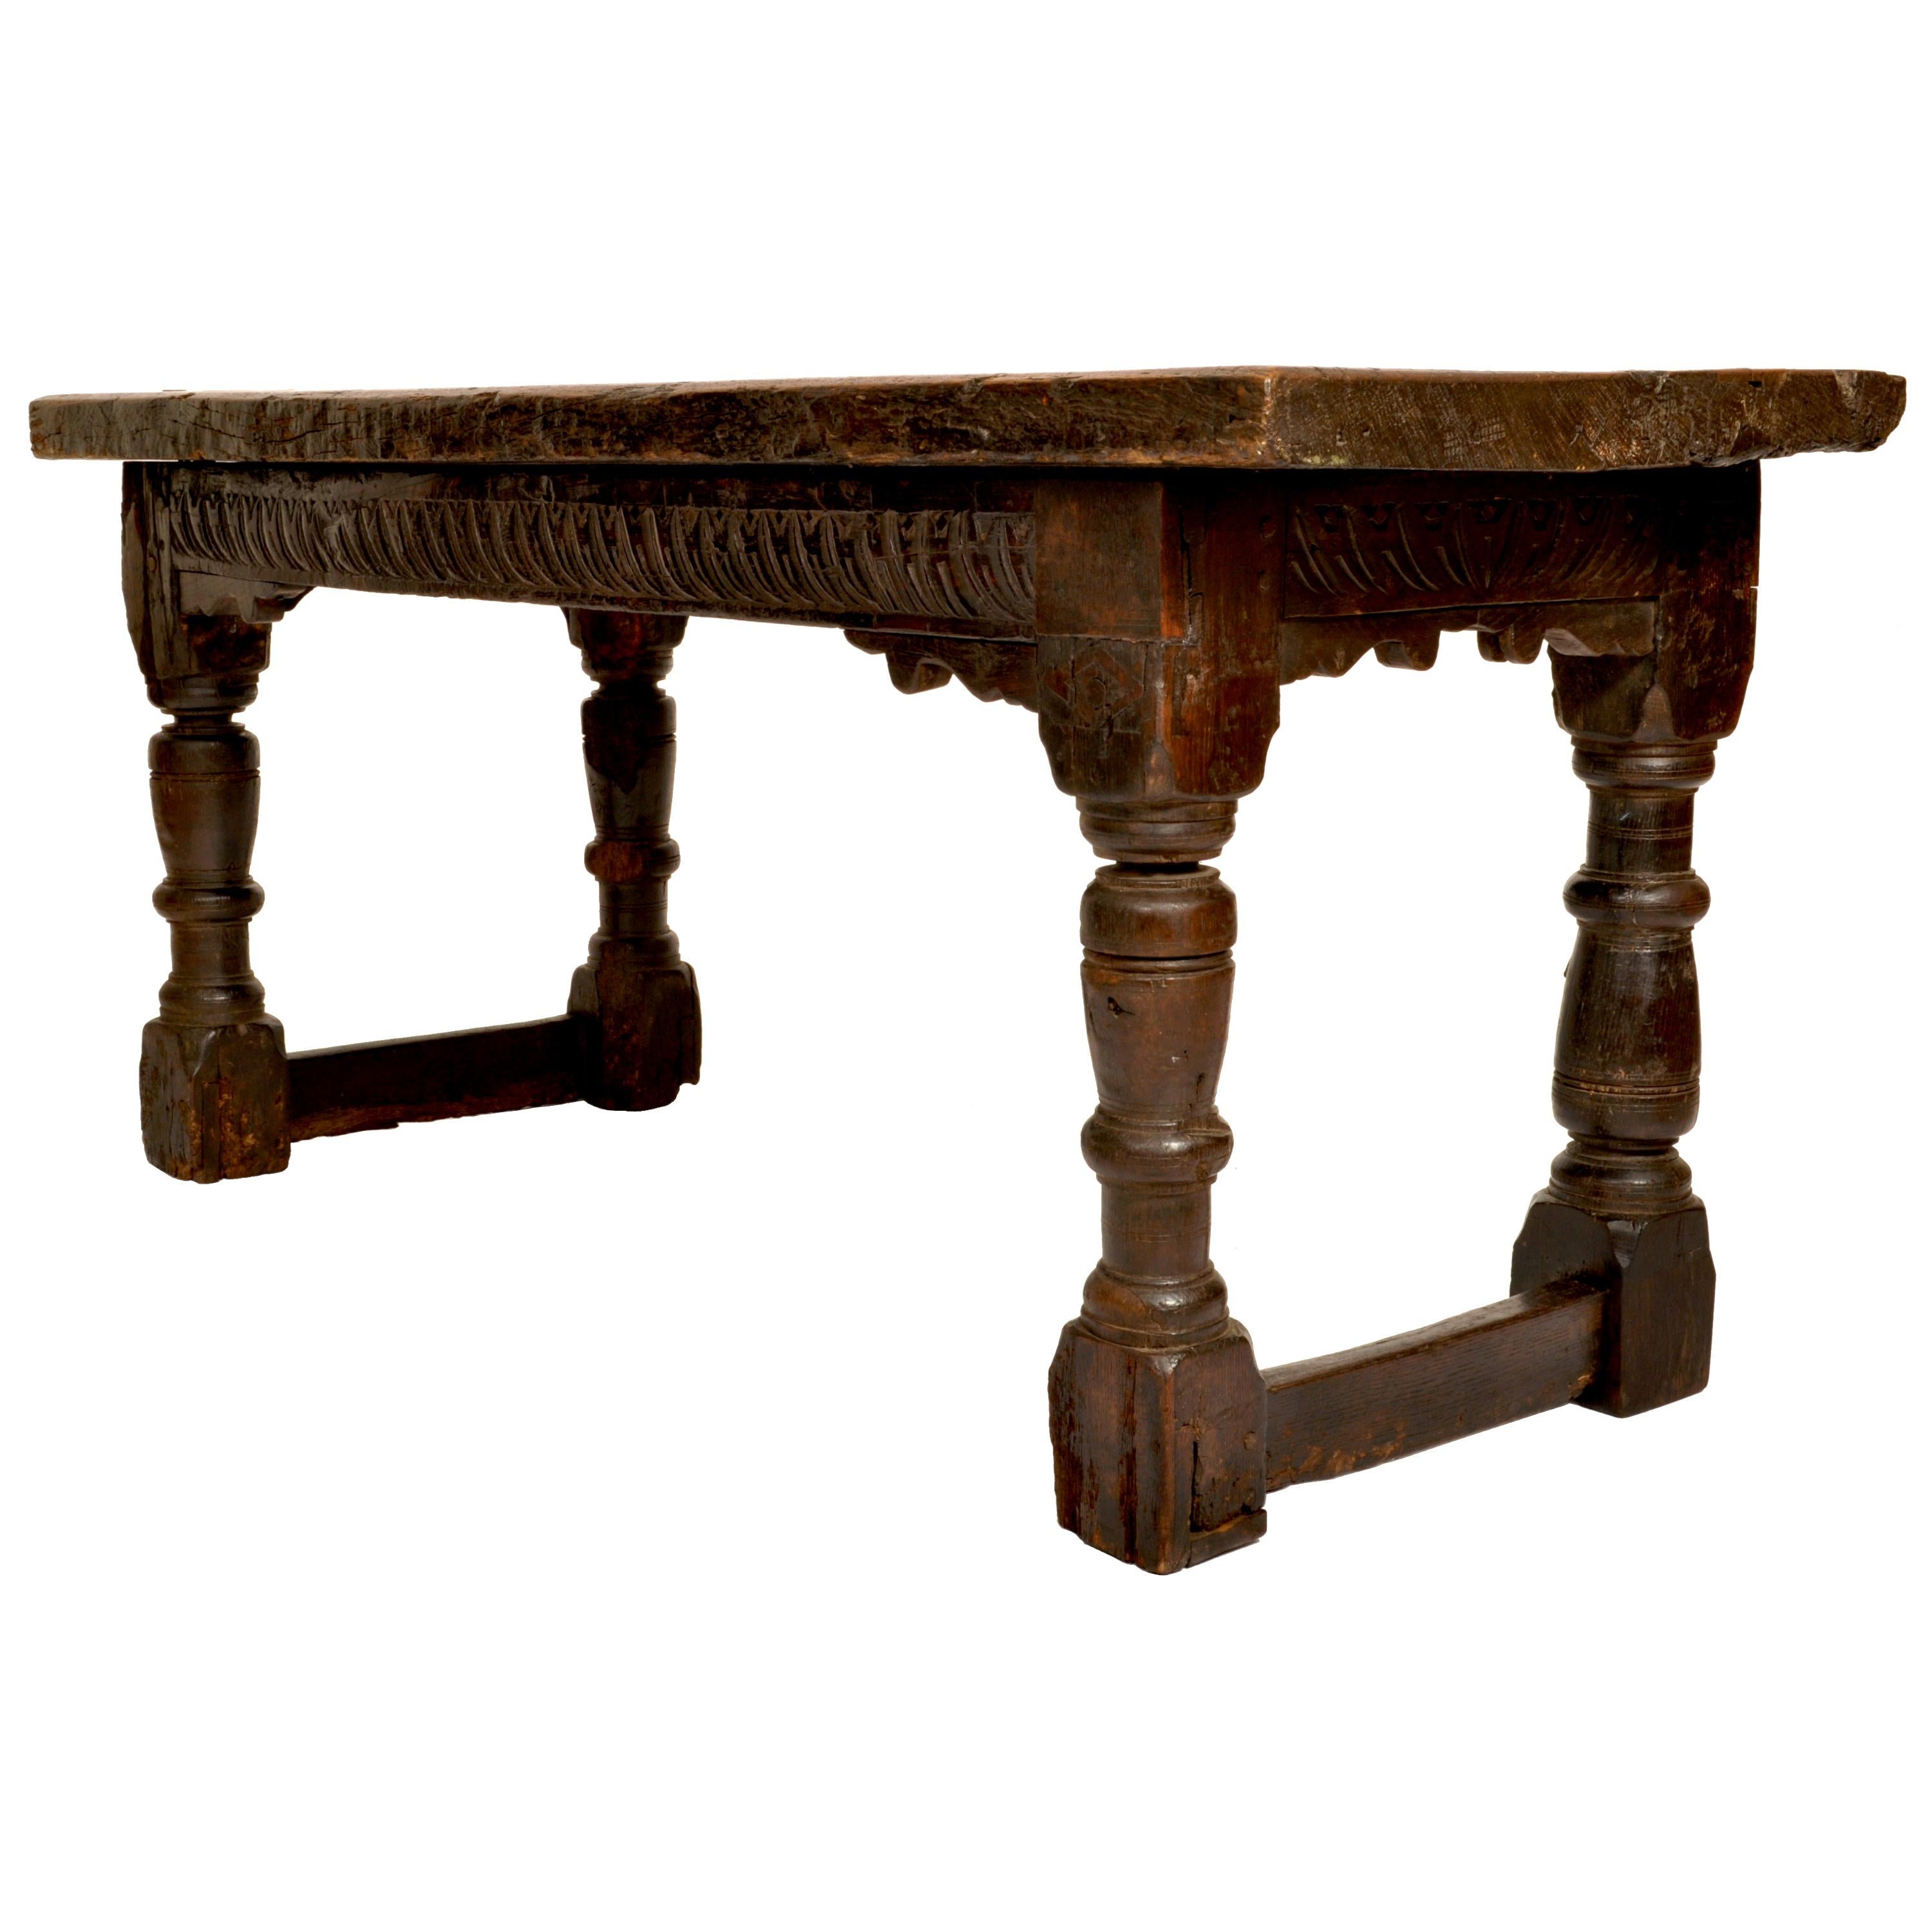 English Antique 16th Century Elizabethan Tudor Carved Oak Dining Refectory Table, 1550